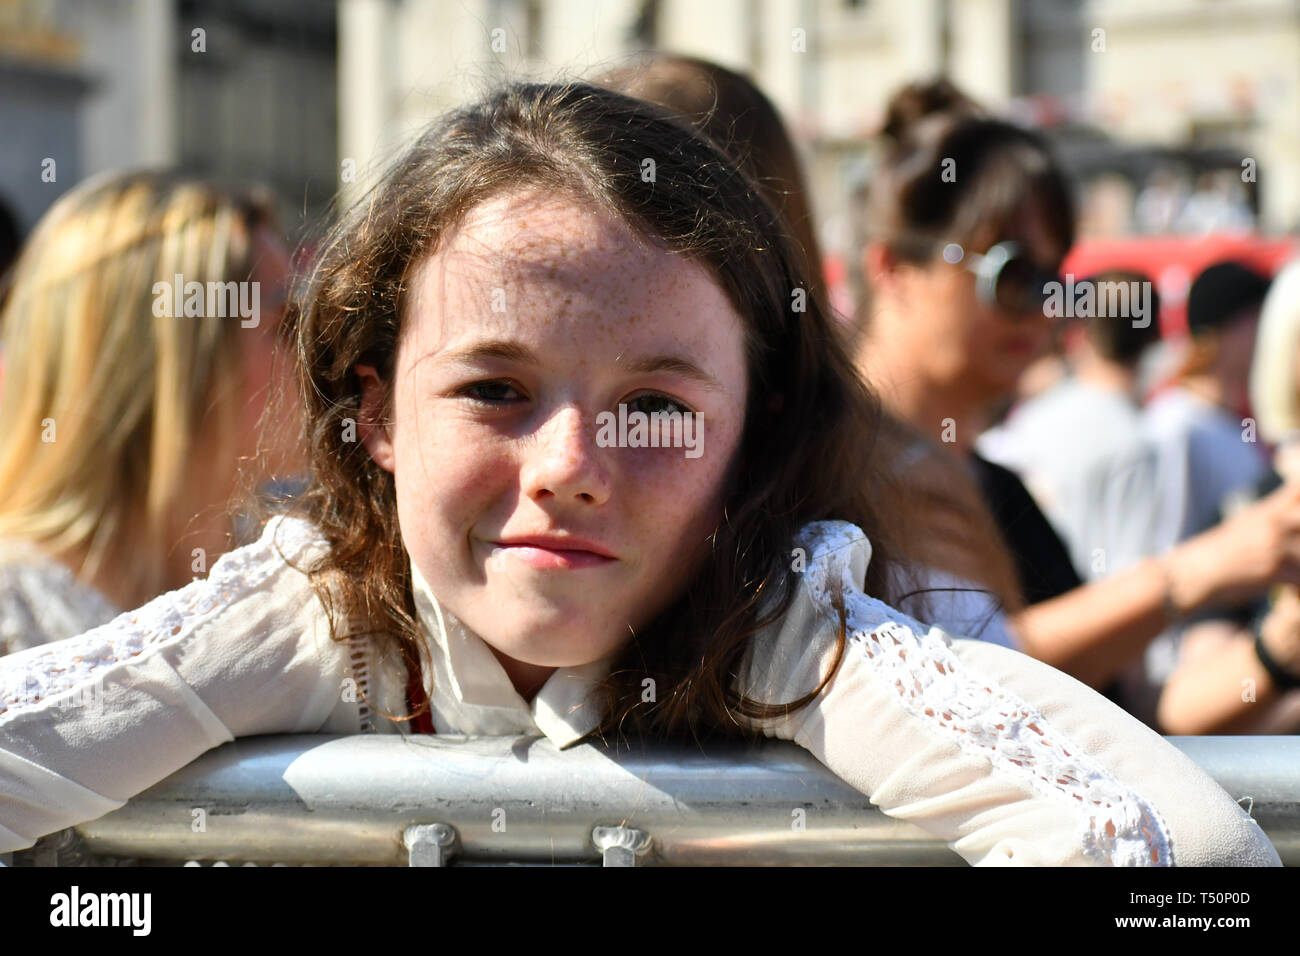 London, UK. 20th April, 2019.Hundreds attend the Feast of St George to celebrate English culture with music and English food stalls in Trafalgar Square on 20 April 2019, London, UK. Credit: Picture Capital/Alamy Live News Stock Photo